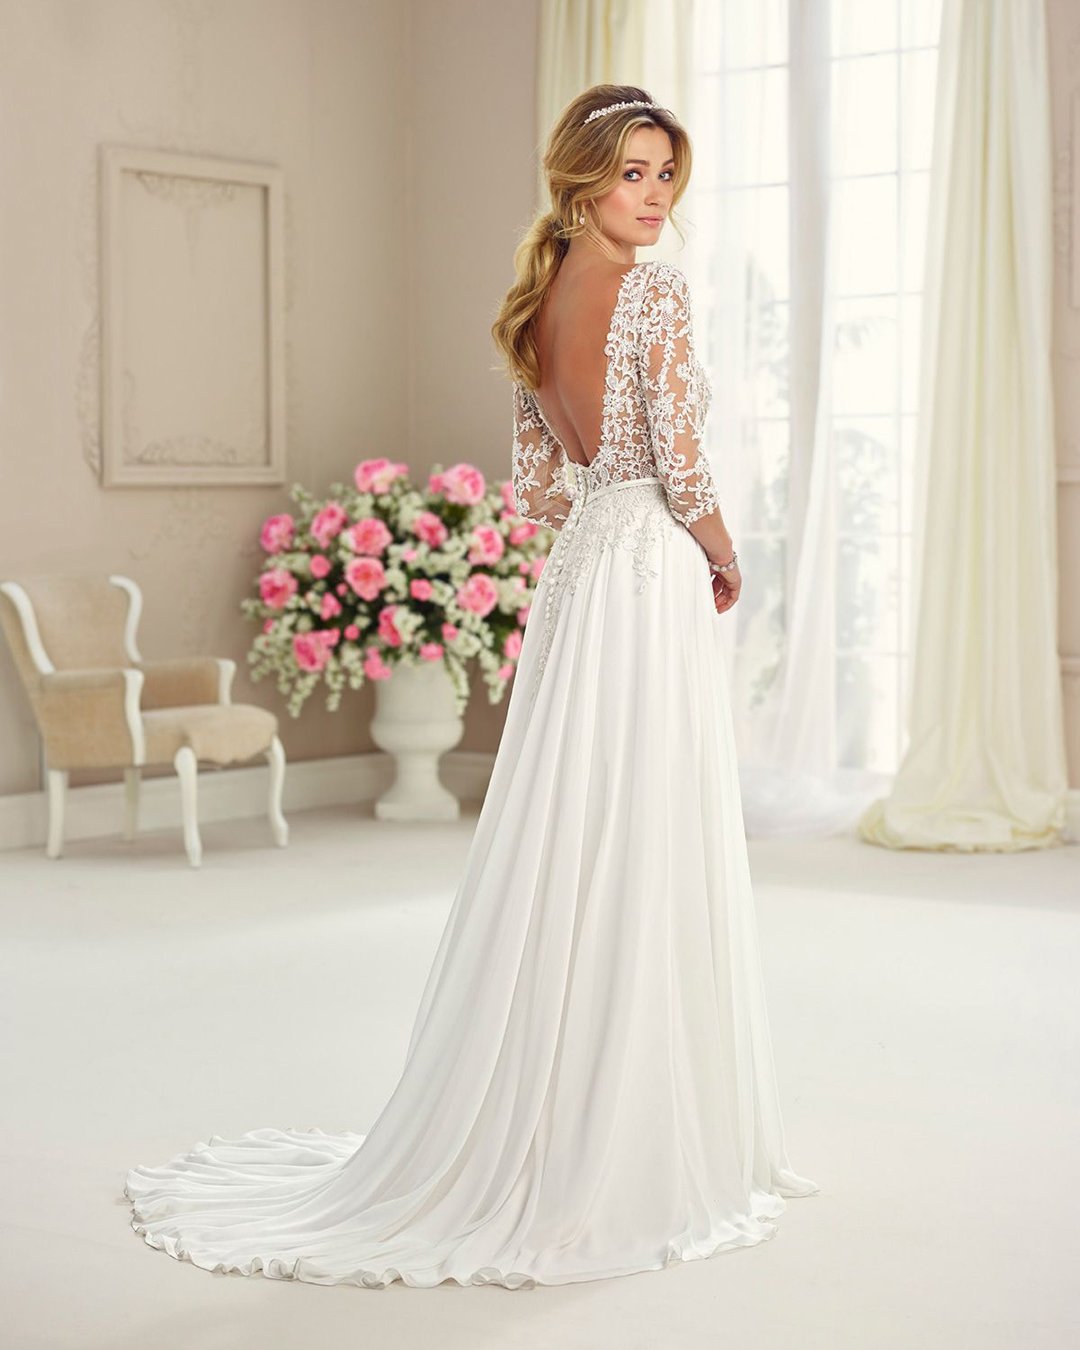 Wedding Dresses For Fall Best 10 Wedding Dresses For Fall Find The Perfect Venue For Your